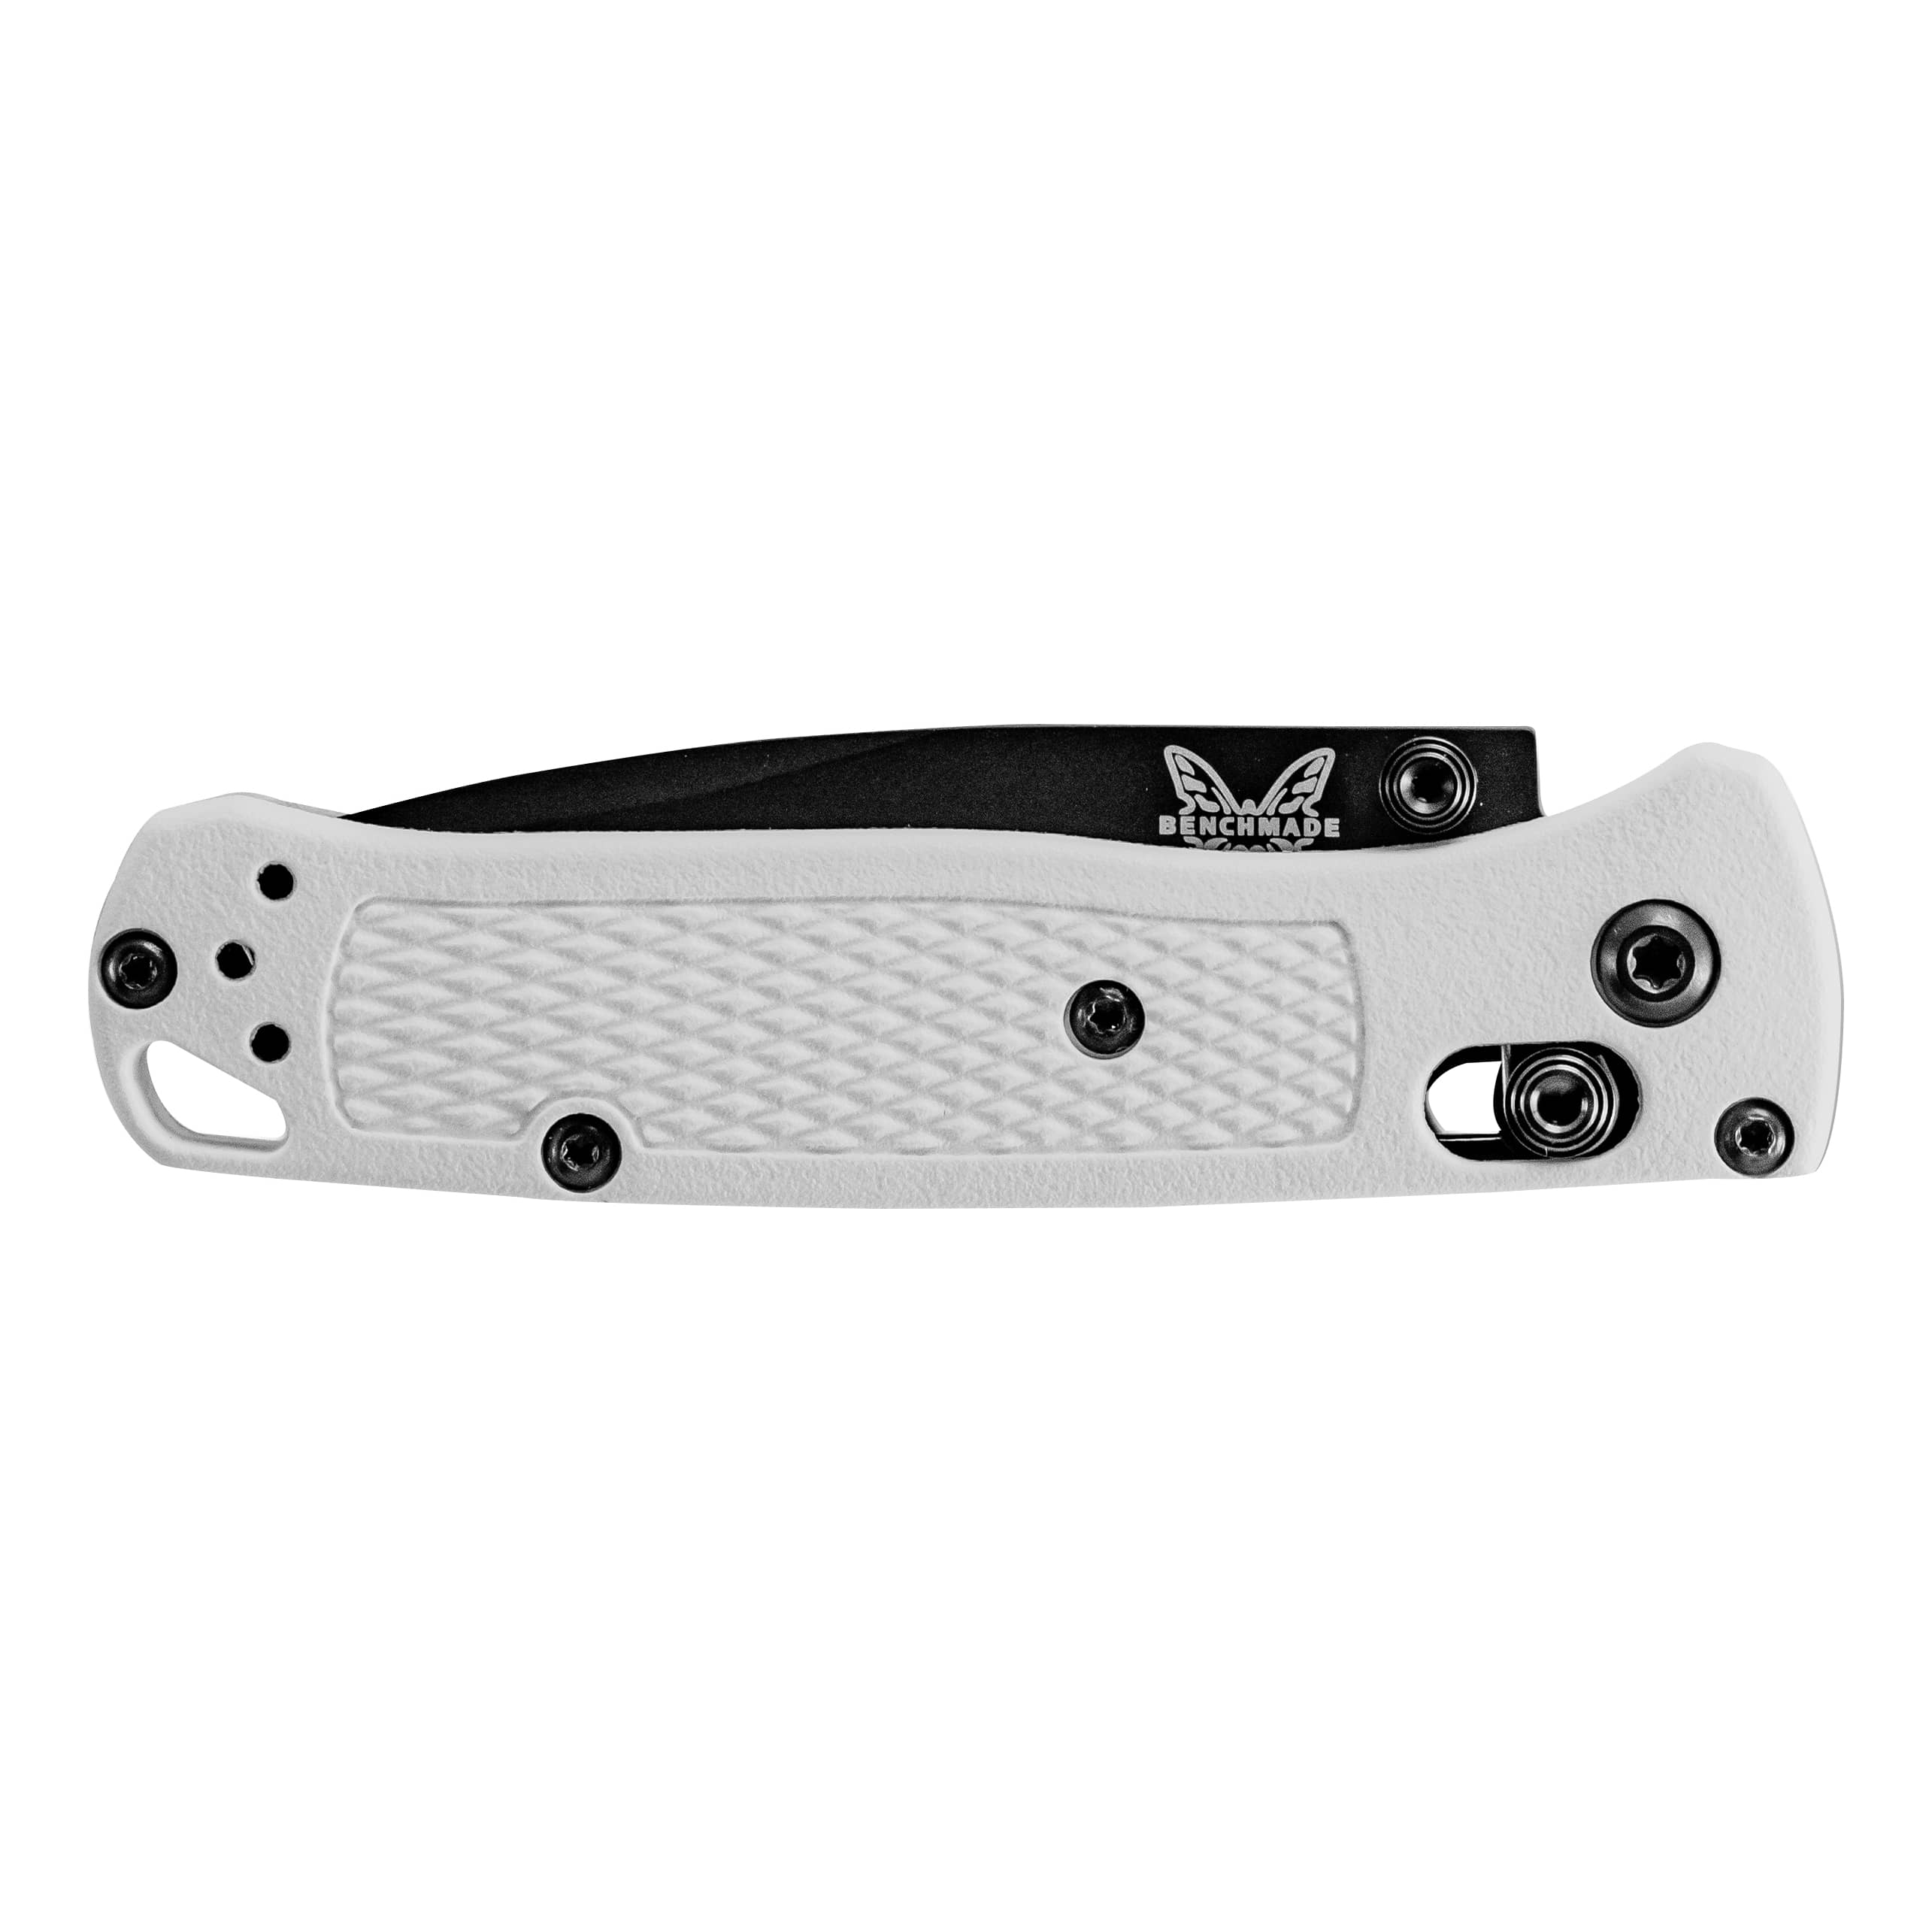 Benchmade® 533 Mini Bugout Folding Knife - White - Closed View